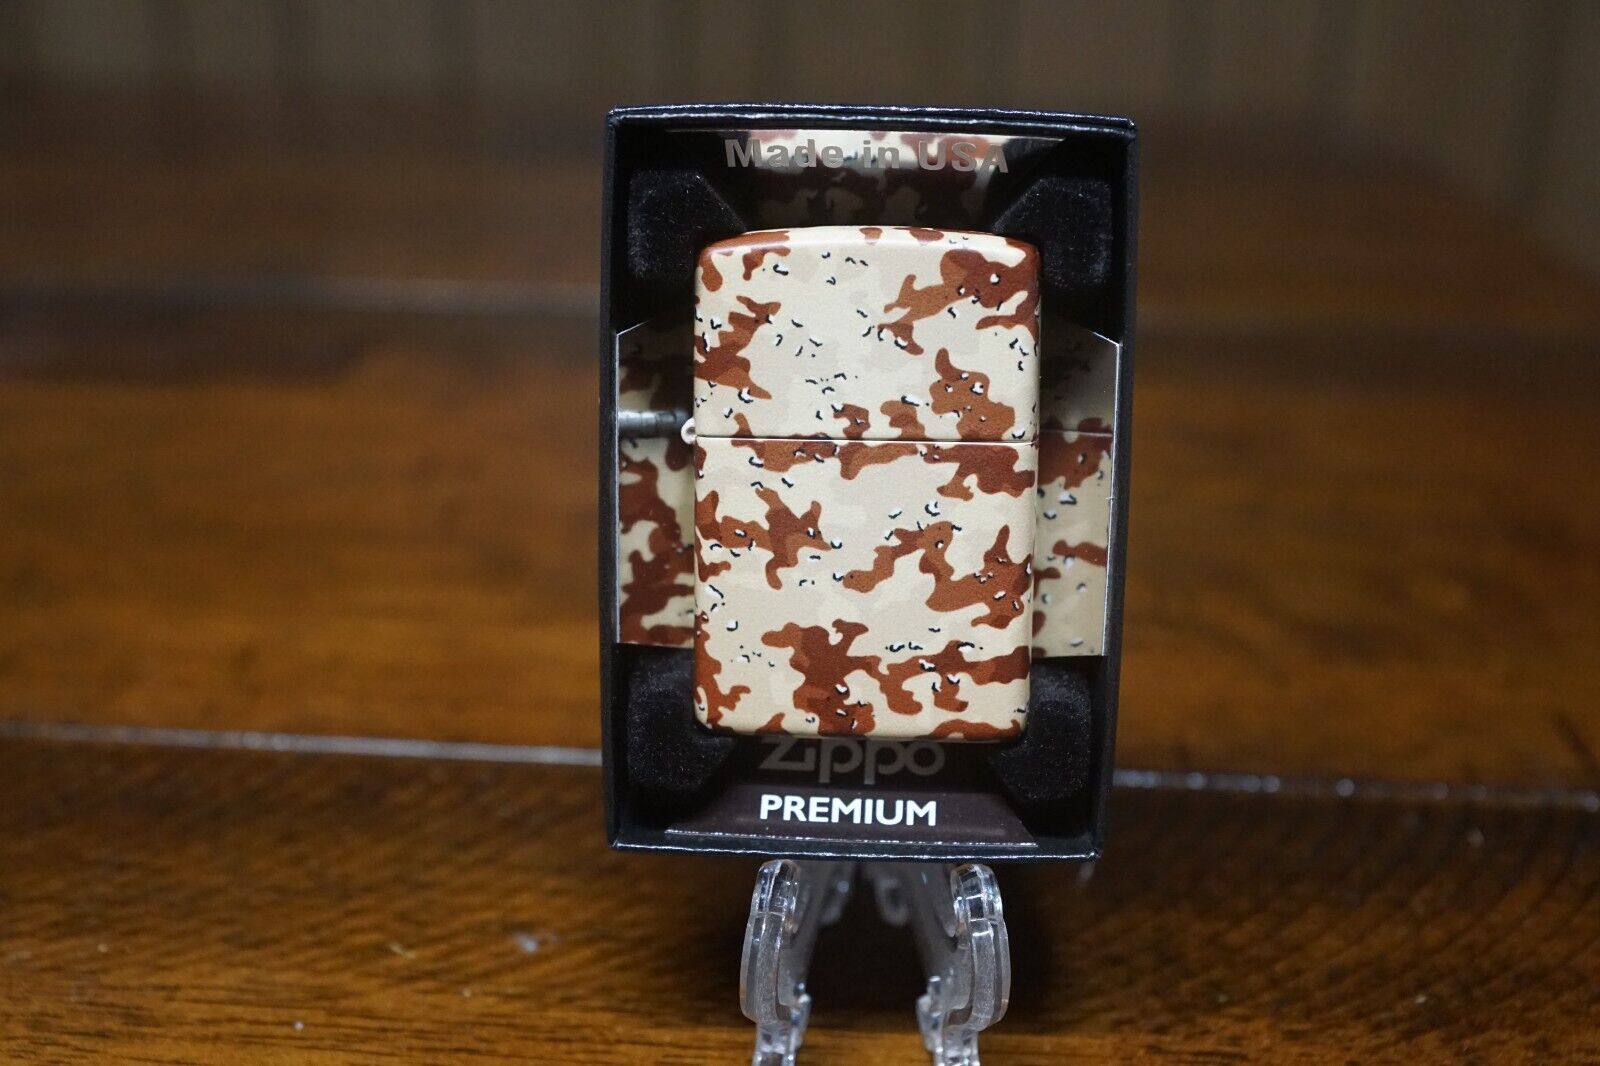 DESERT CAMO CAMOUFLAGE MILITARY 540 DESIGN ZIPPO LIGHTER MINT IN BOX. Available Now for 39.95